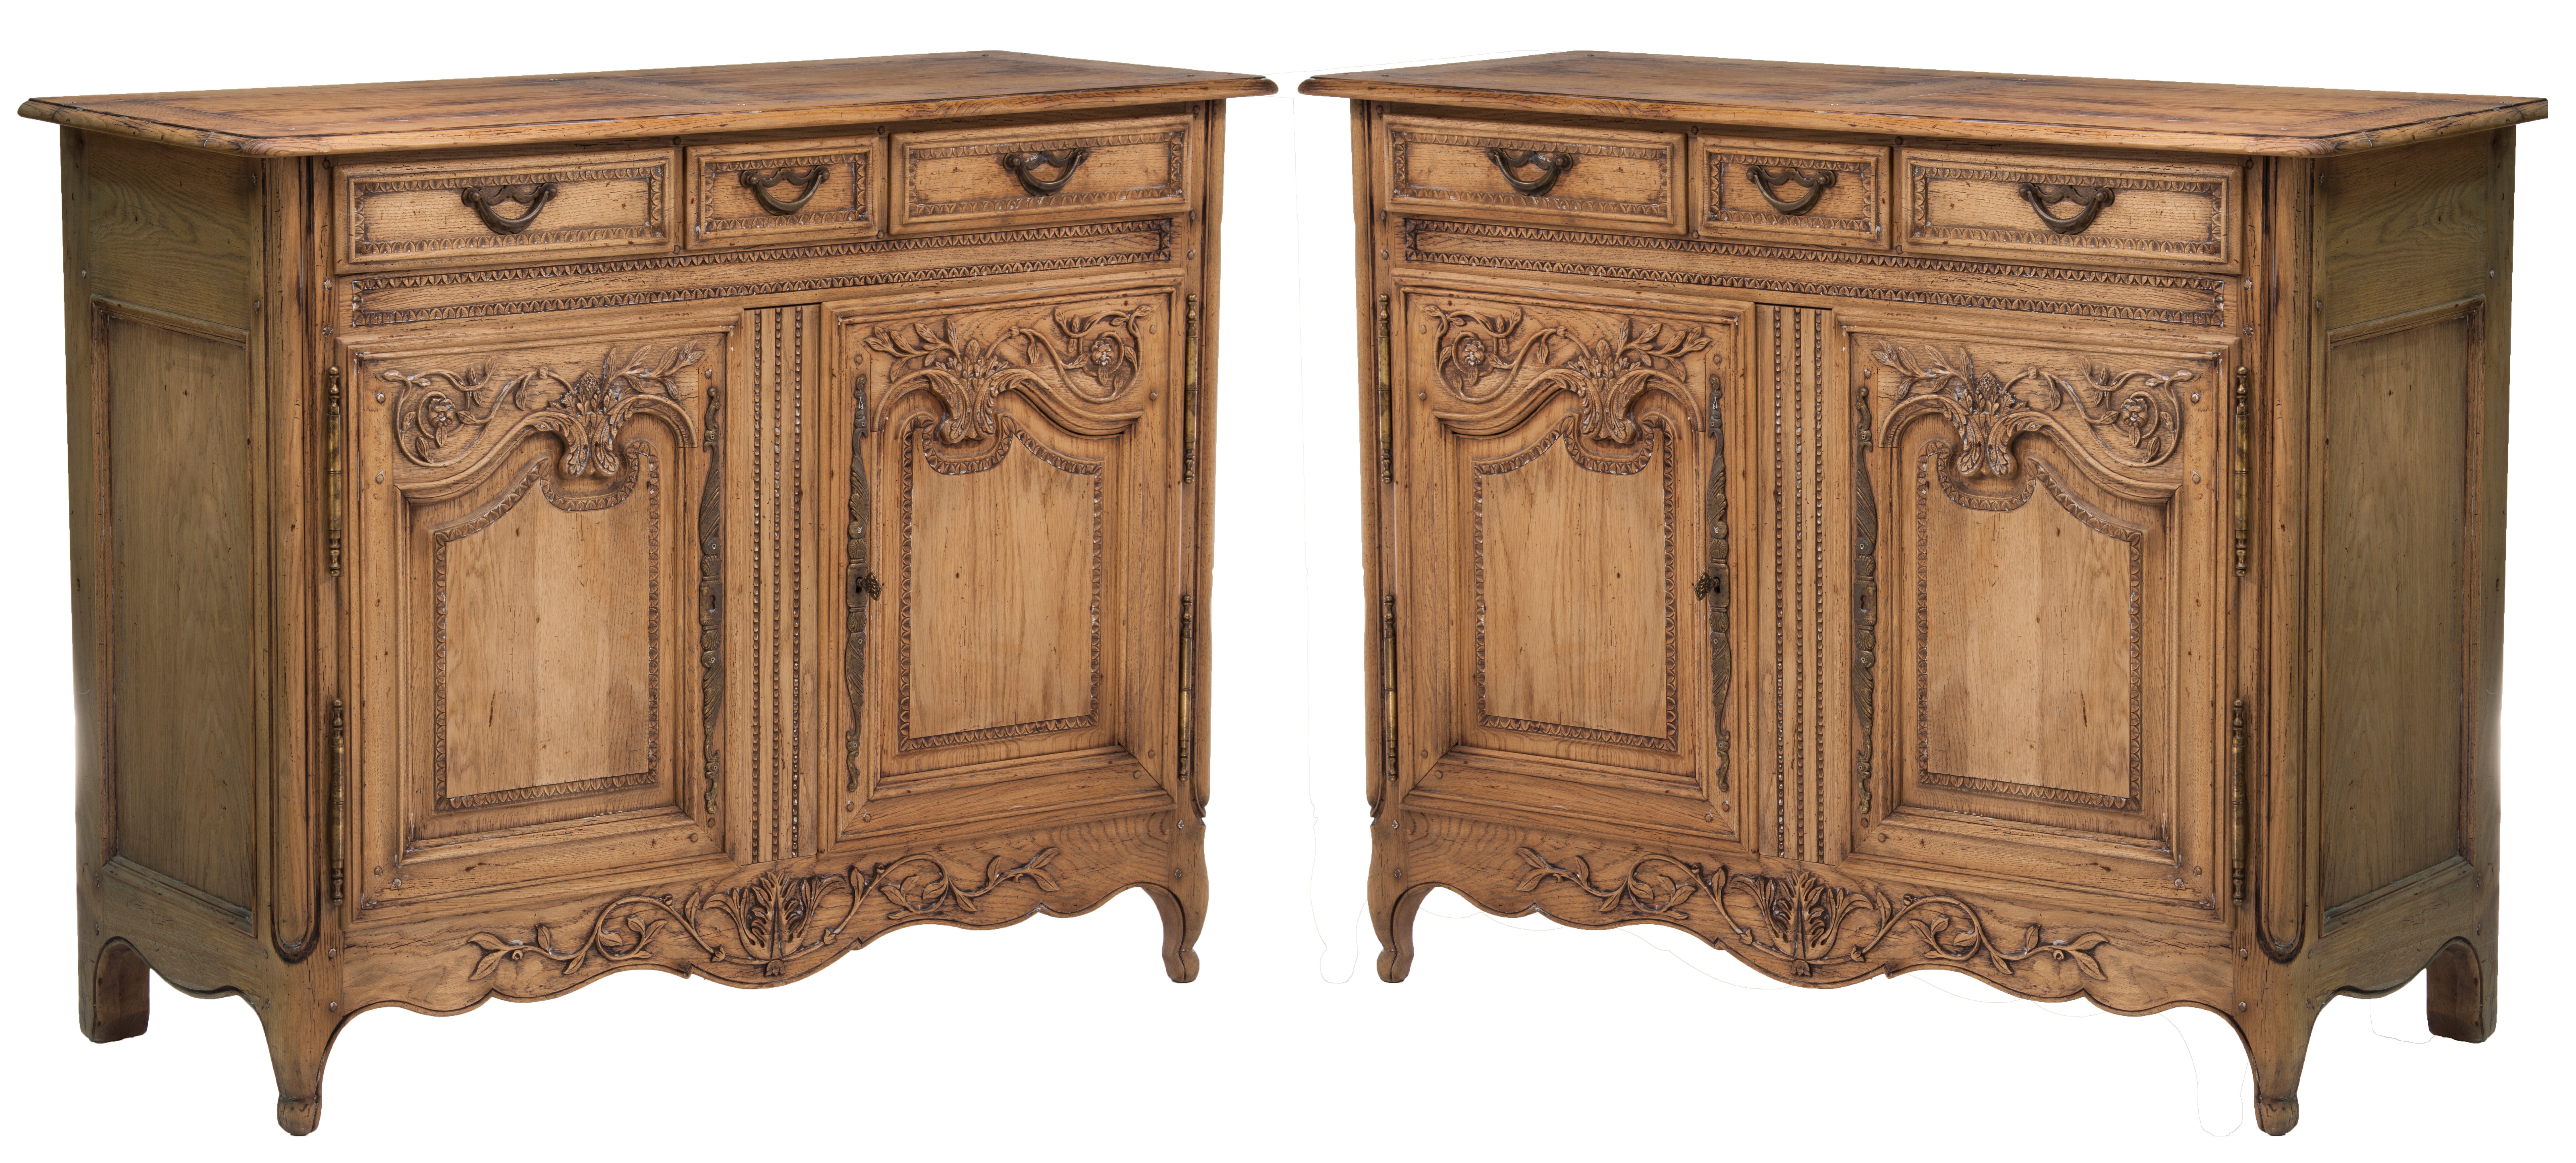 Pair of Oak Normandy Servers made in Italy for Bloomingdales For Sale